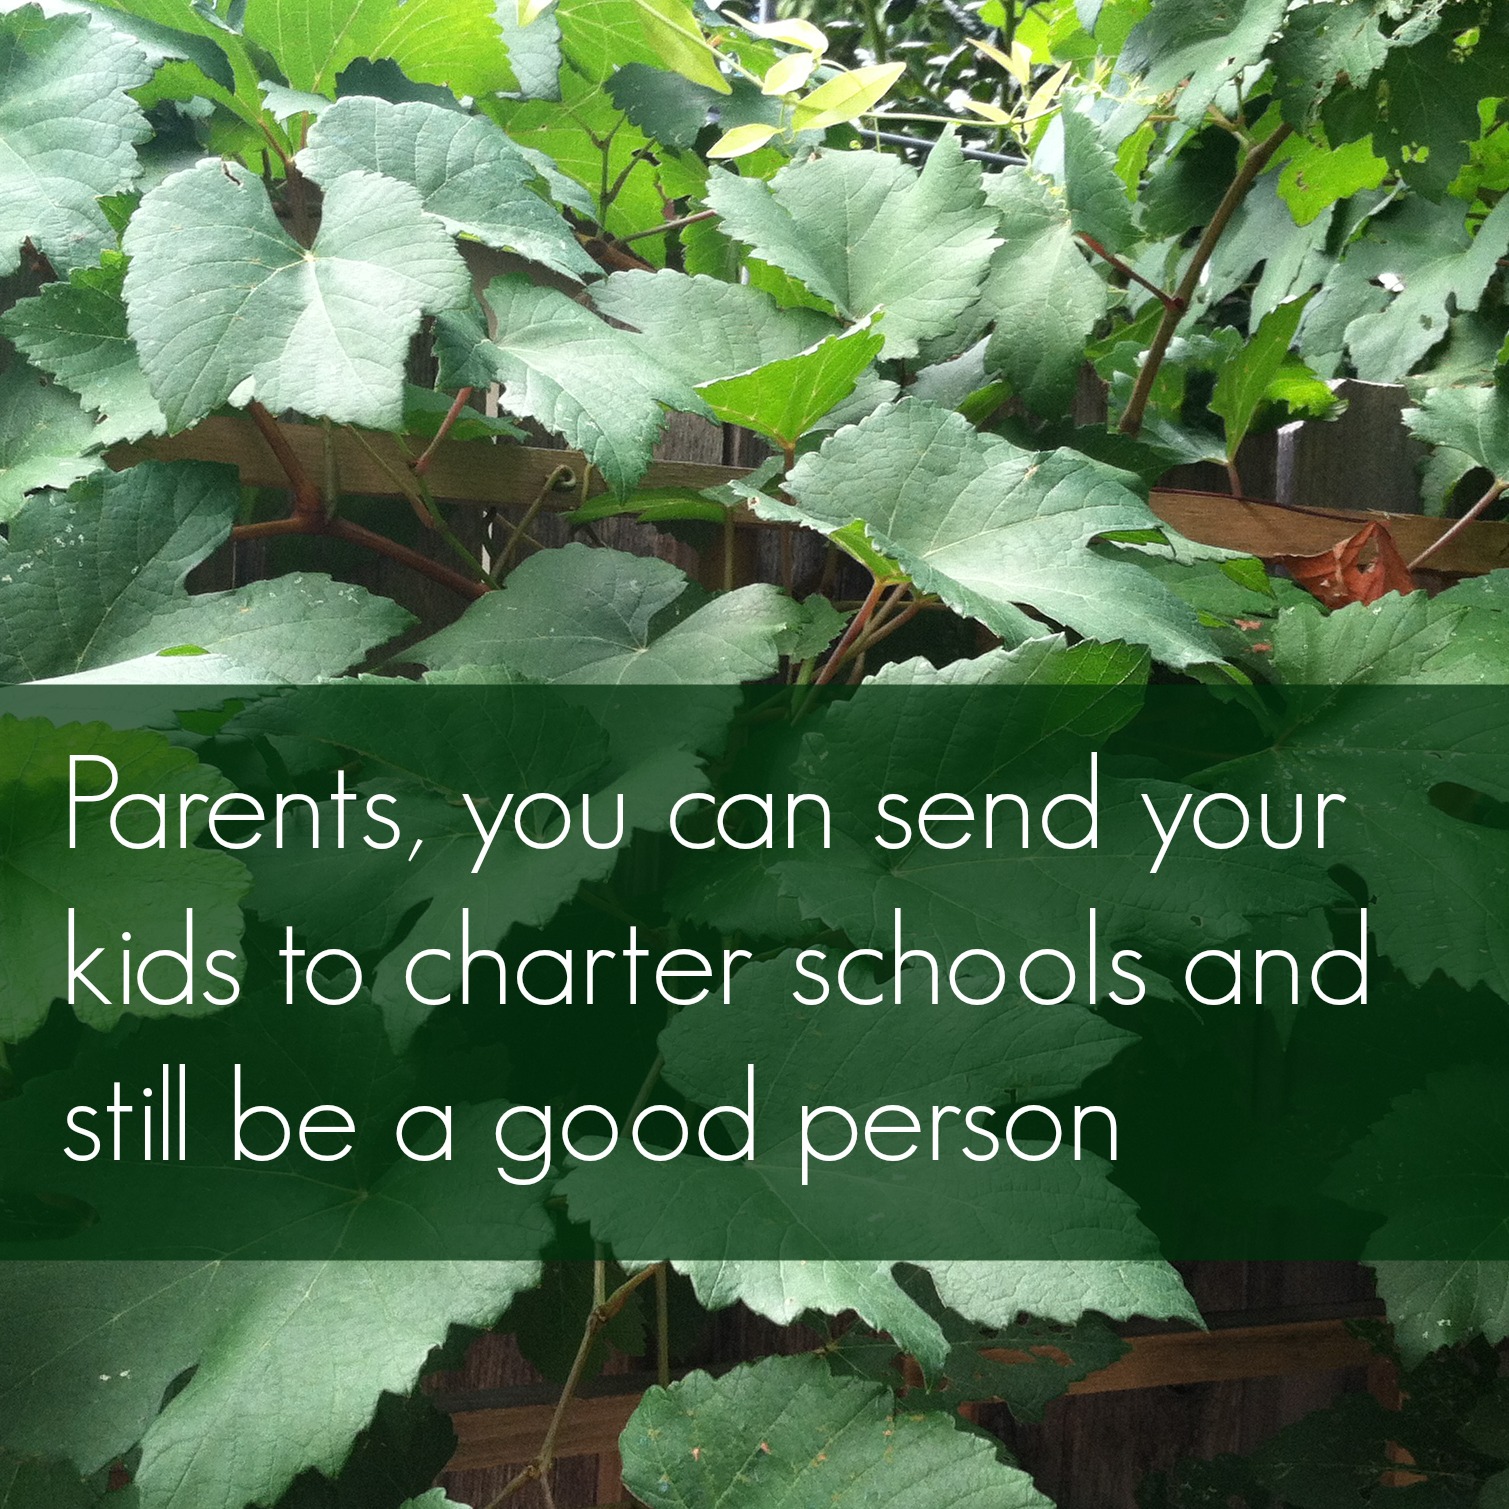 Parents, you can send your kids to charter schools and still be a good person | San Antonio Charter Moms